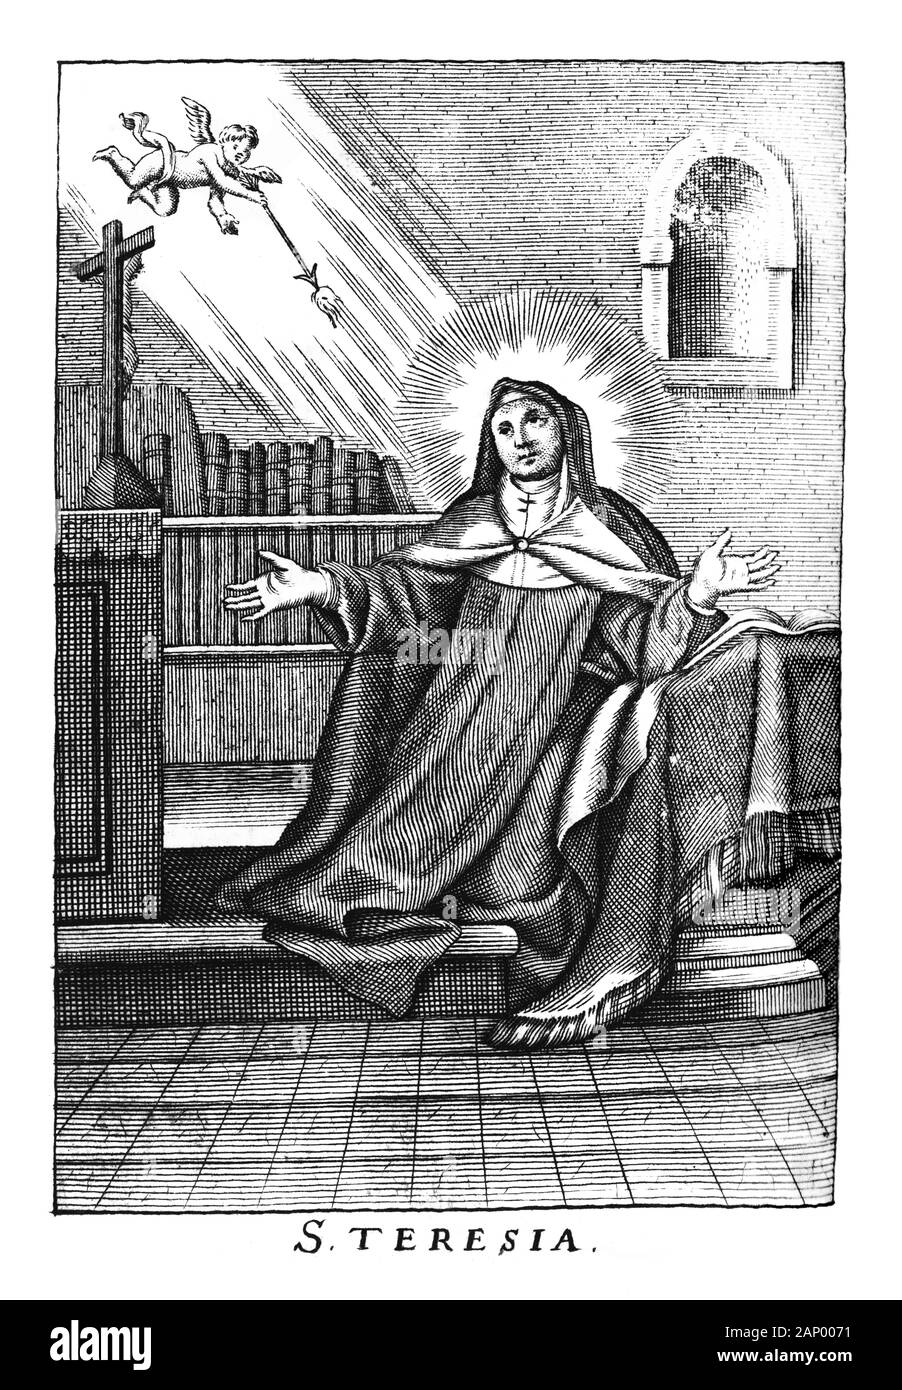 Antique vintage religious allegorical engraving or drawing of nun or Christian holy woman saint Teresa.Illustration from Book Die Betrubte Und noch Ihrem Beliebten..., Austrian Empire,1716. Artist is unknown. Stock Photo